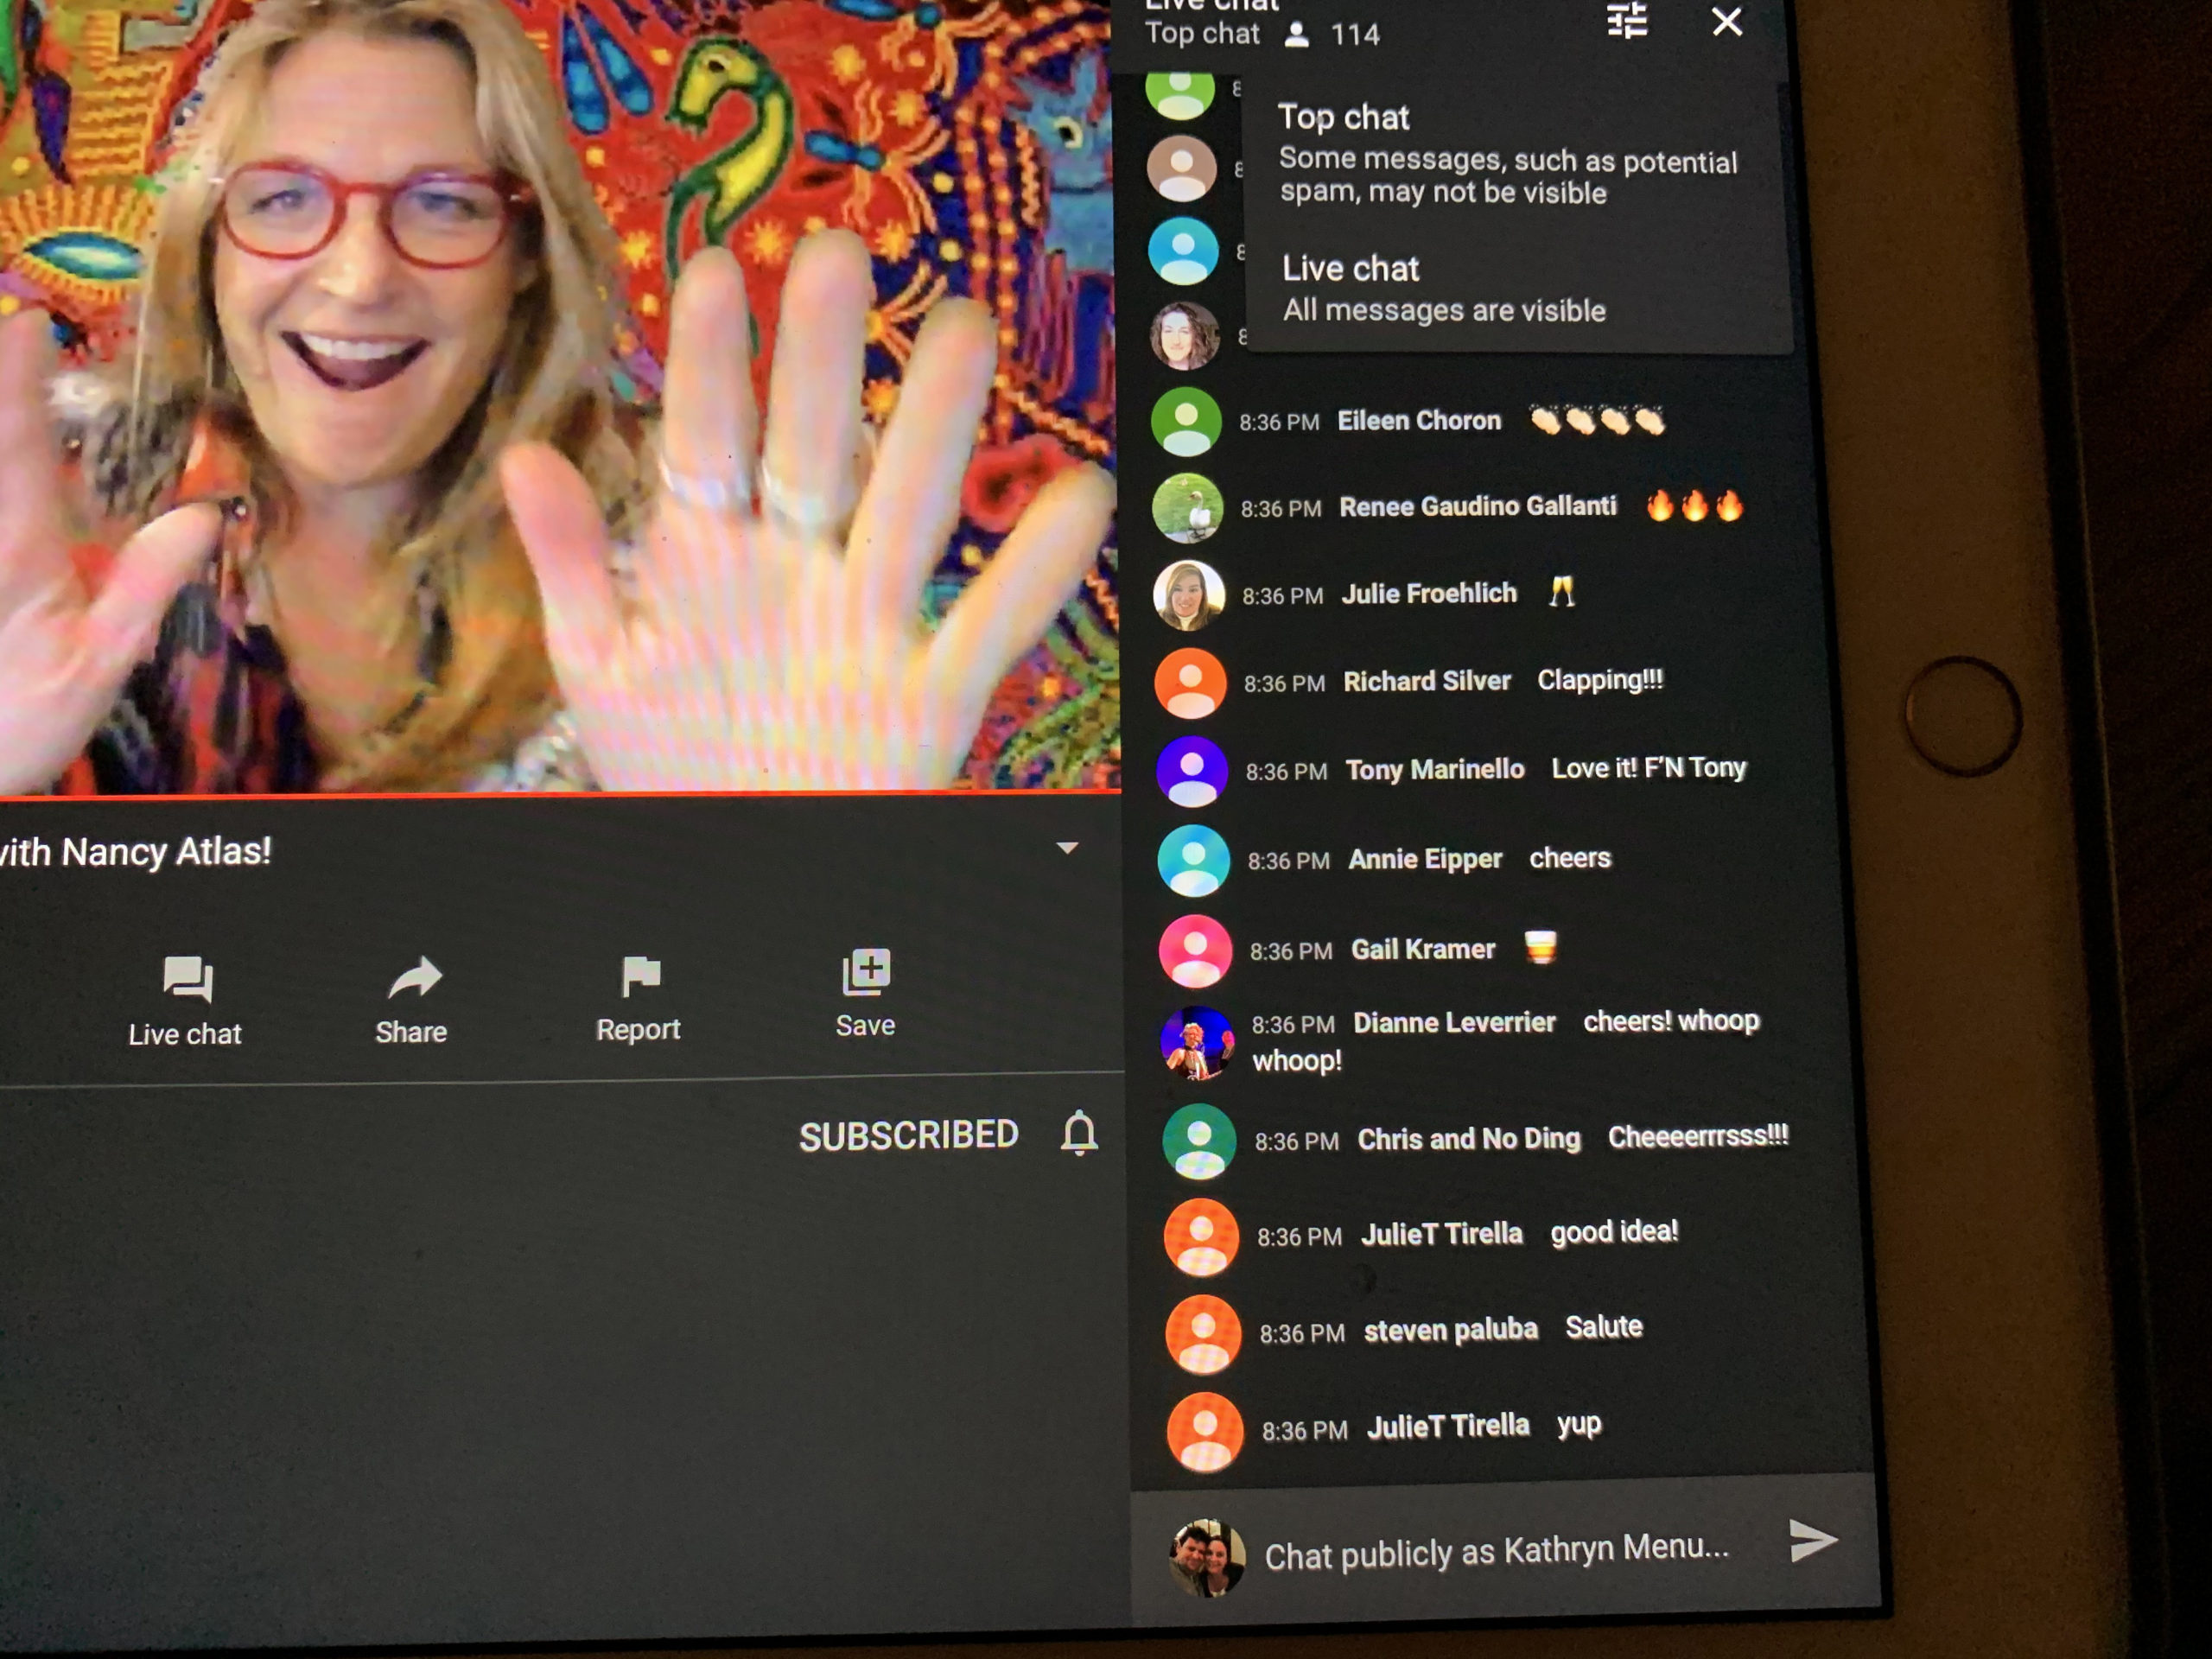 Nancy Atlas connected and performed for her fans virtually on Saturday.   GAVIN MENU